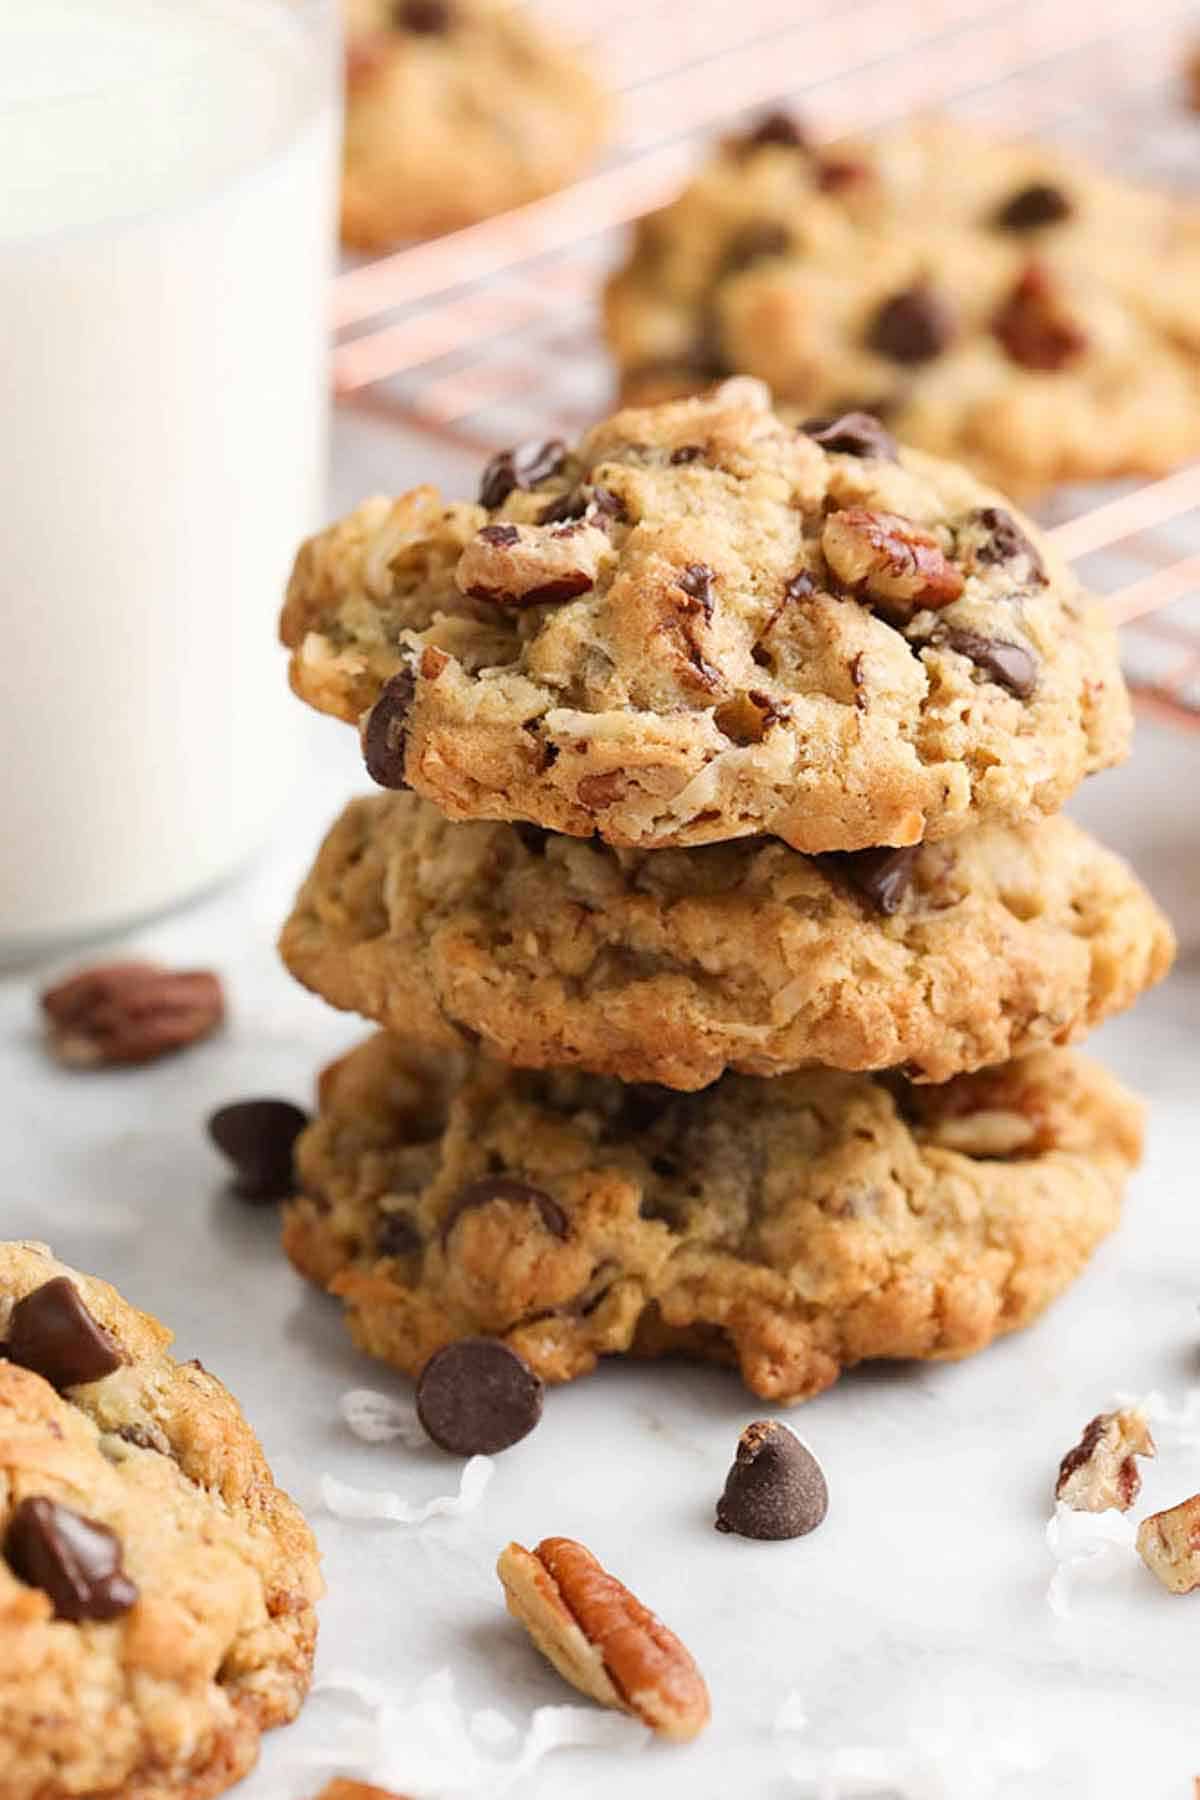 A stack of three cowboy cookies with additional ingredients scattered around.